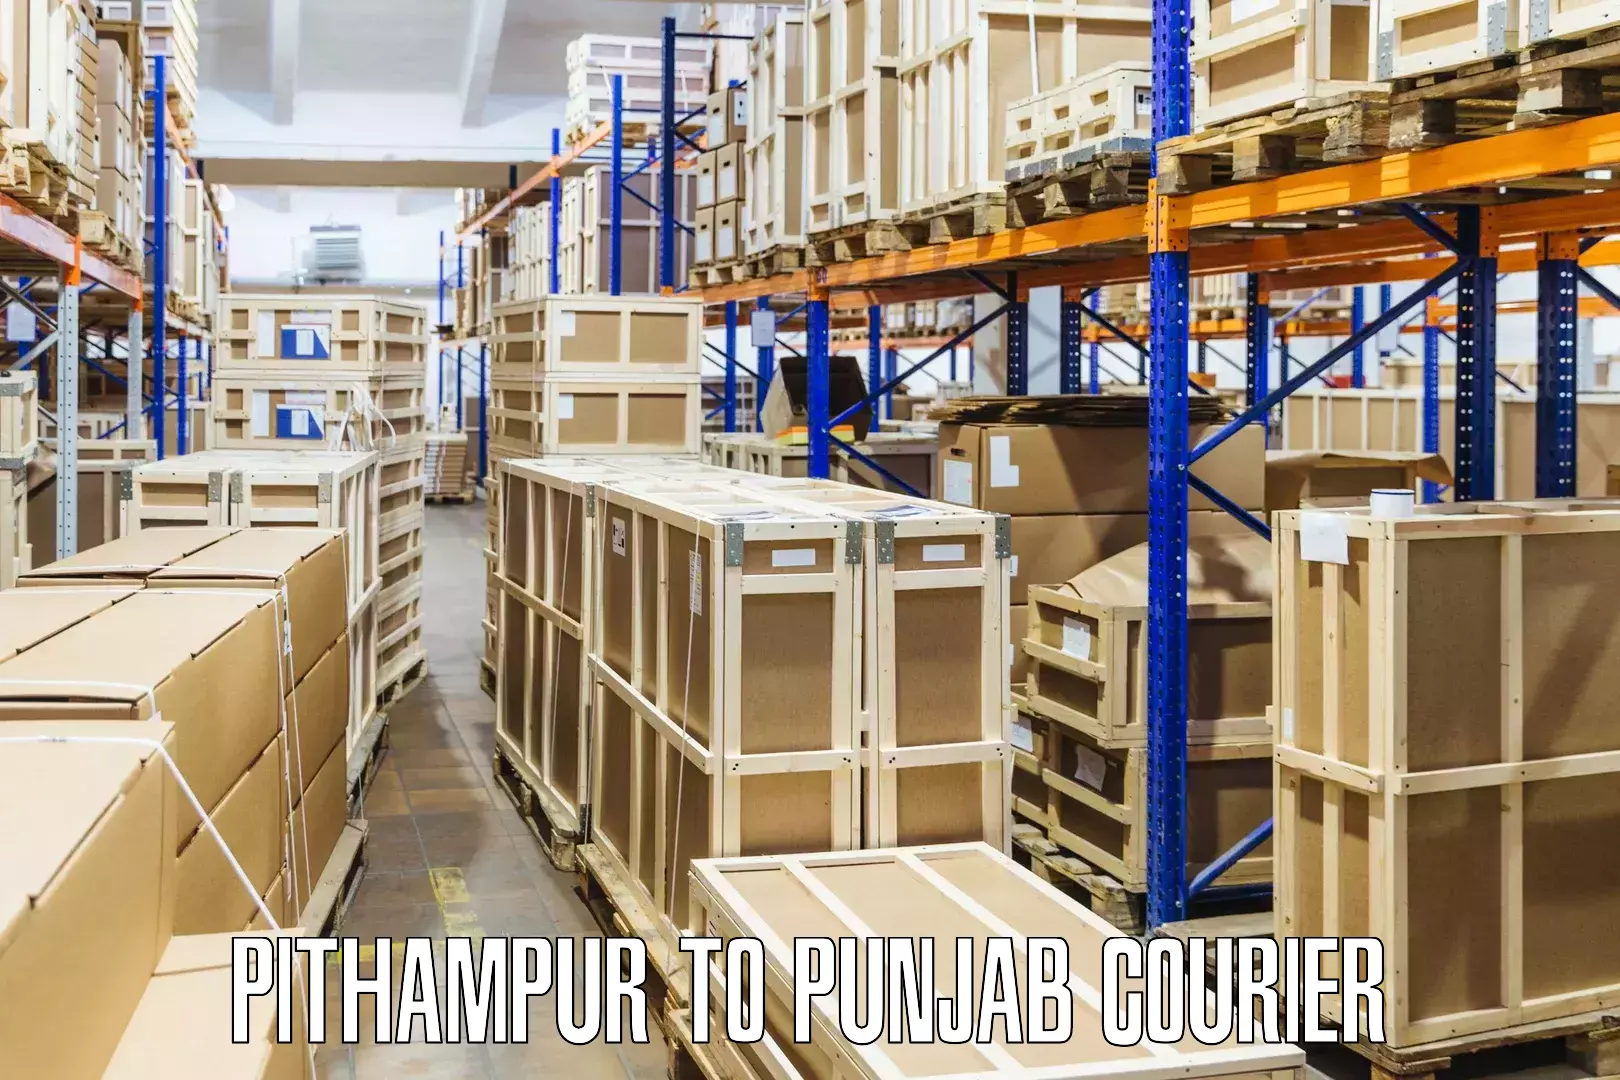 Same-day delivery options Pithampur to Mohali